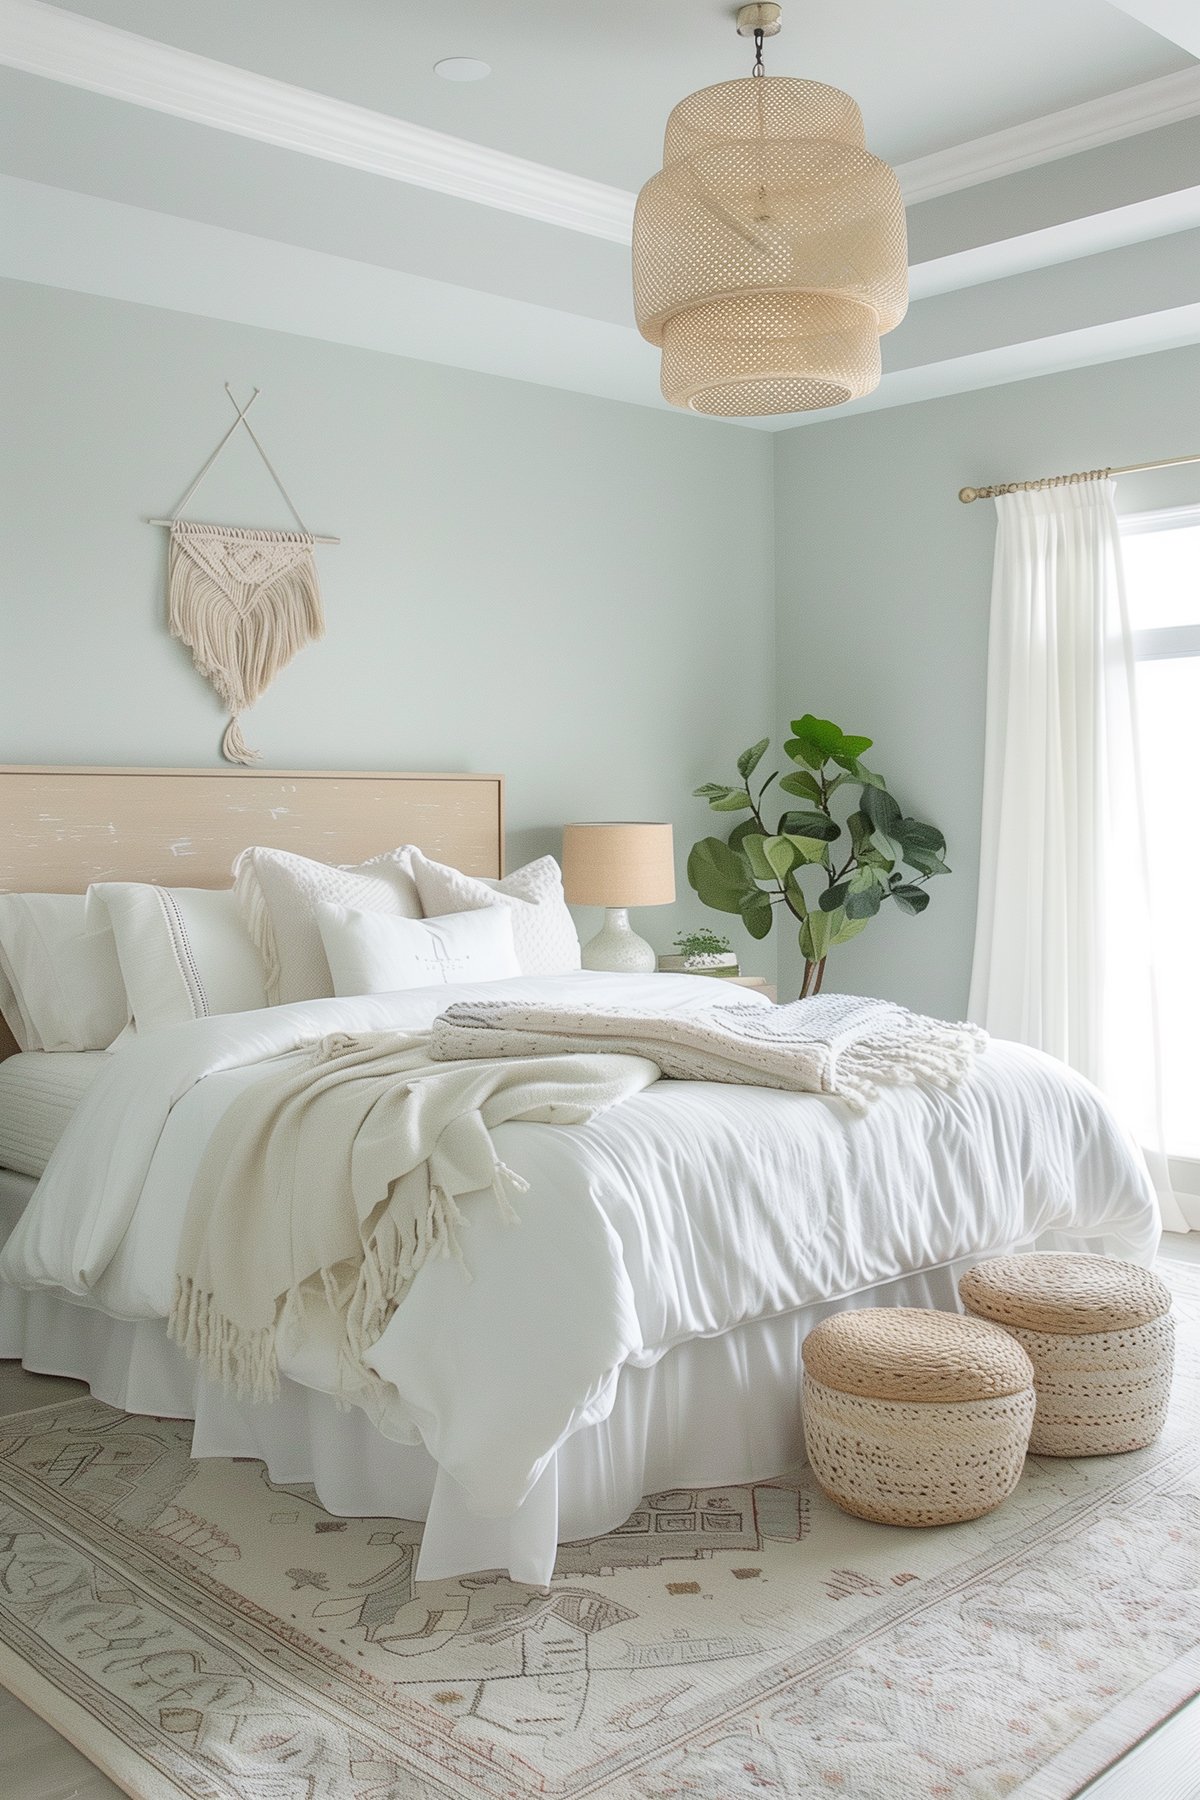 light and airy bedroom with SW Rainwashed walls, breezy curtains and white bedding.